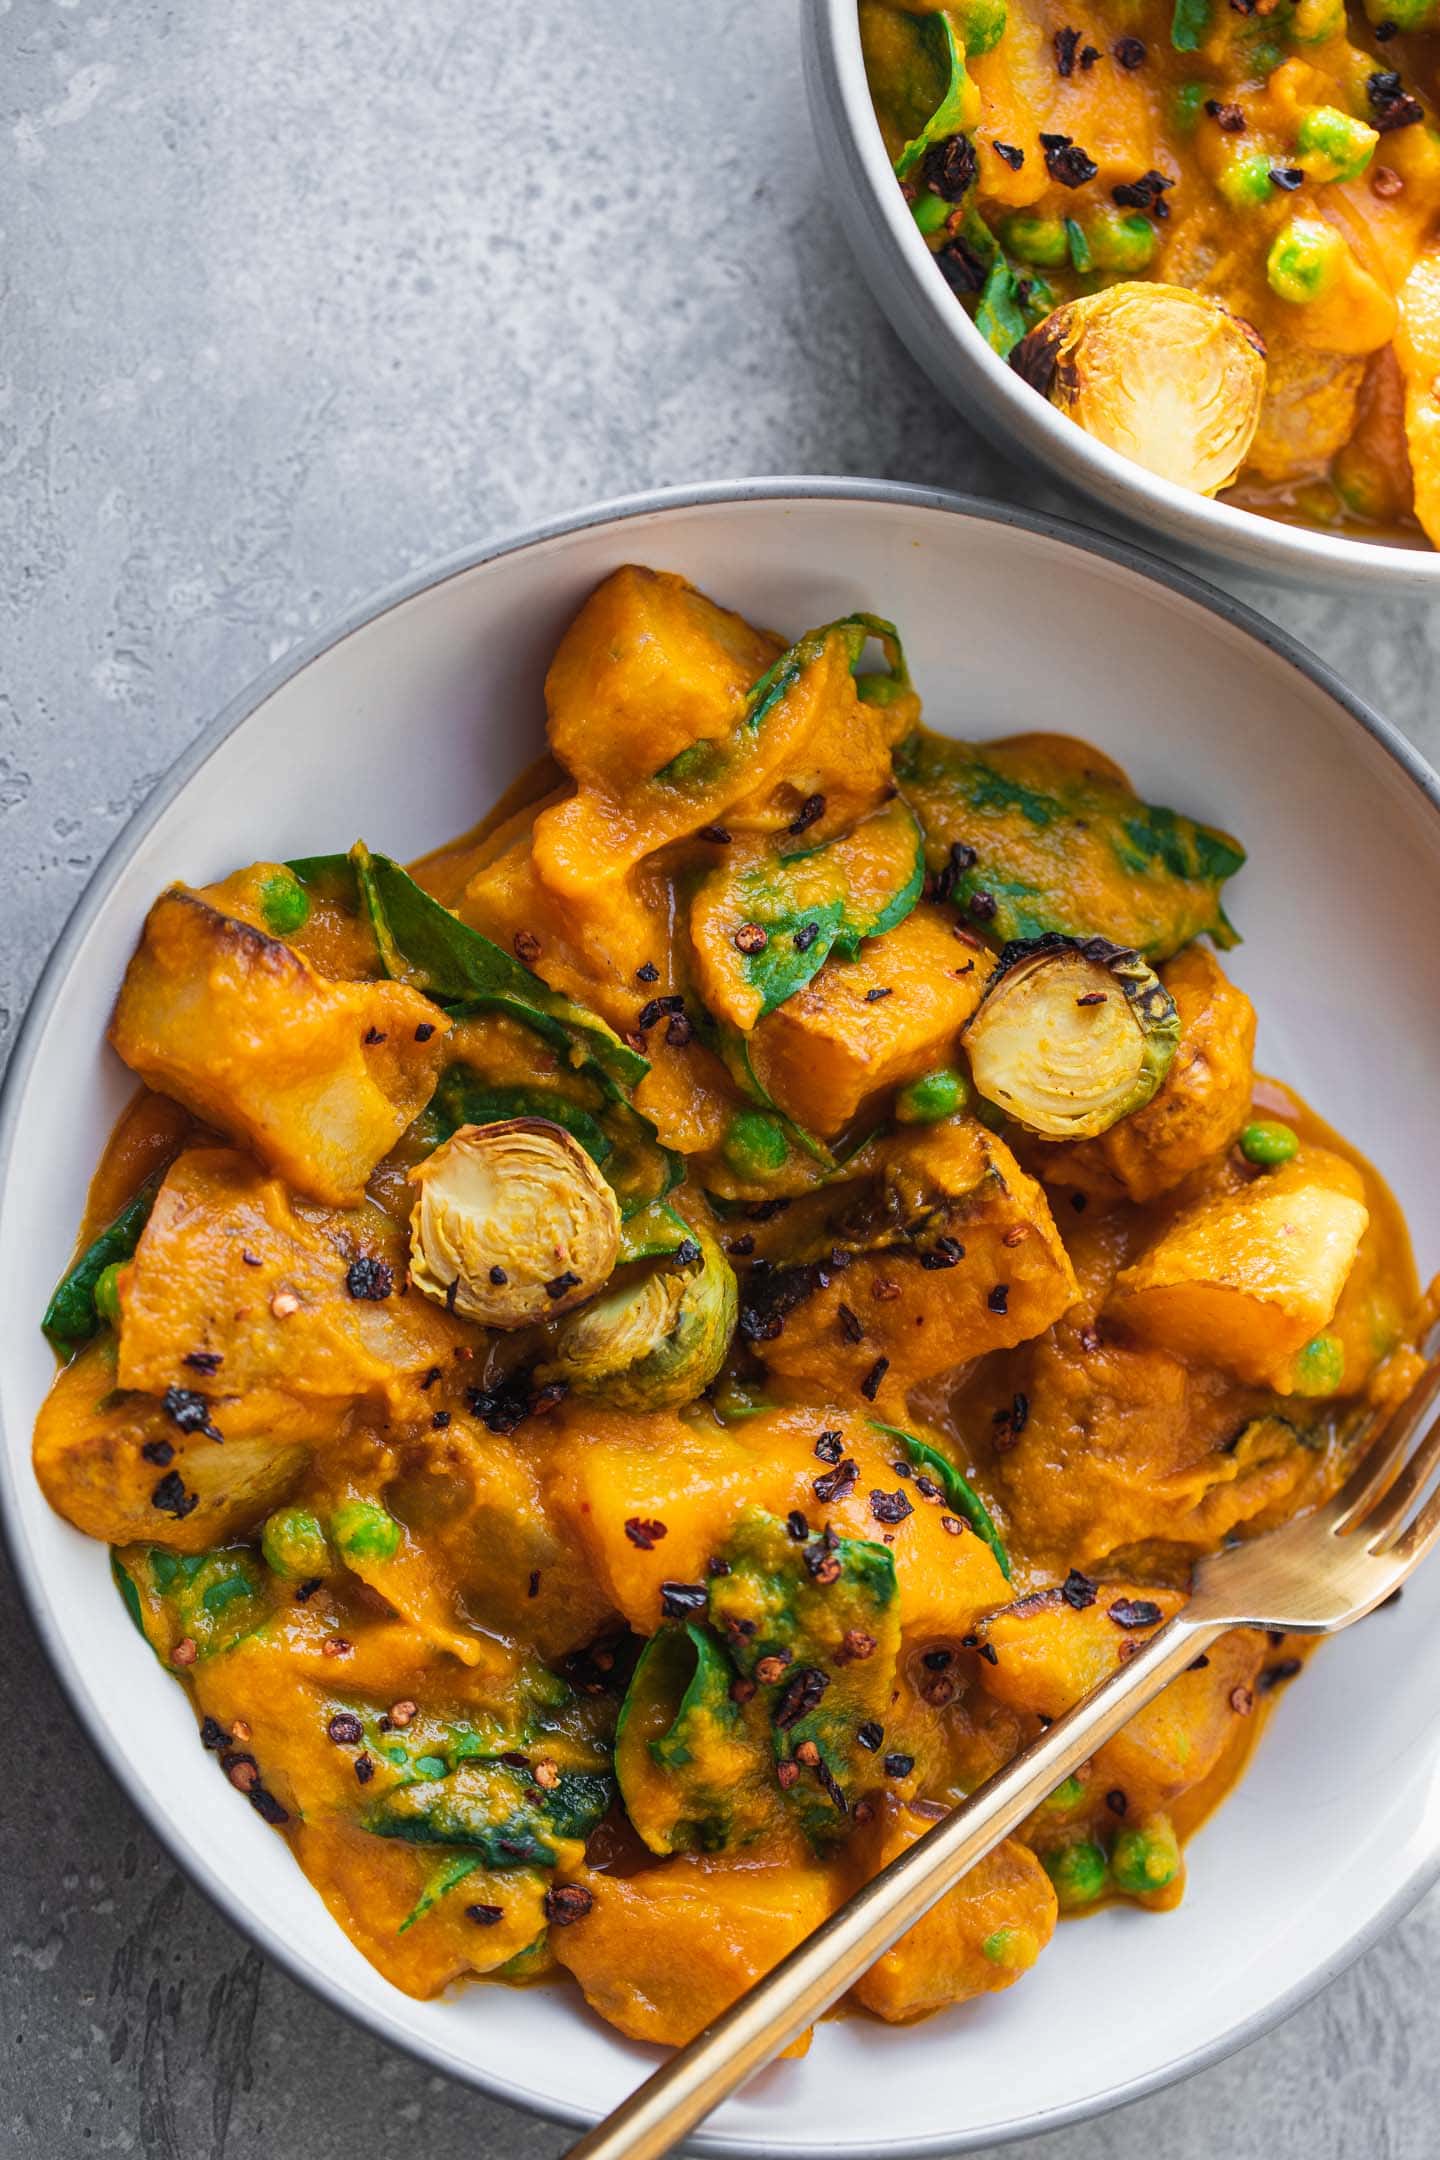 Potatoes and Brussels sprouts with a butternut squash sauce